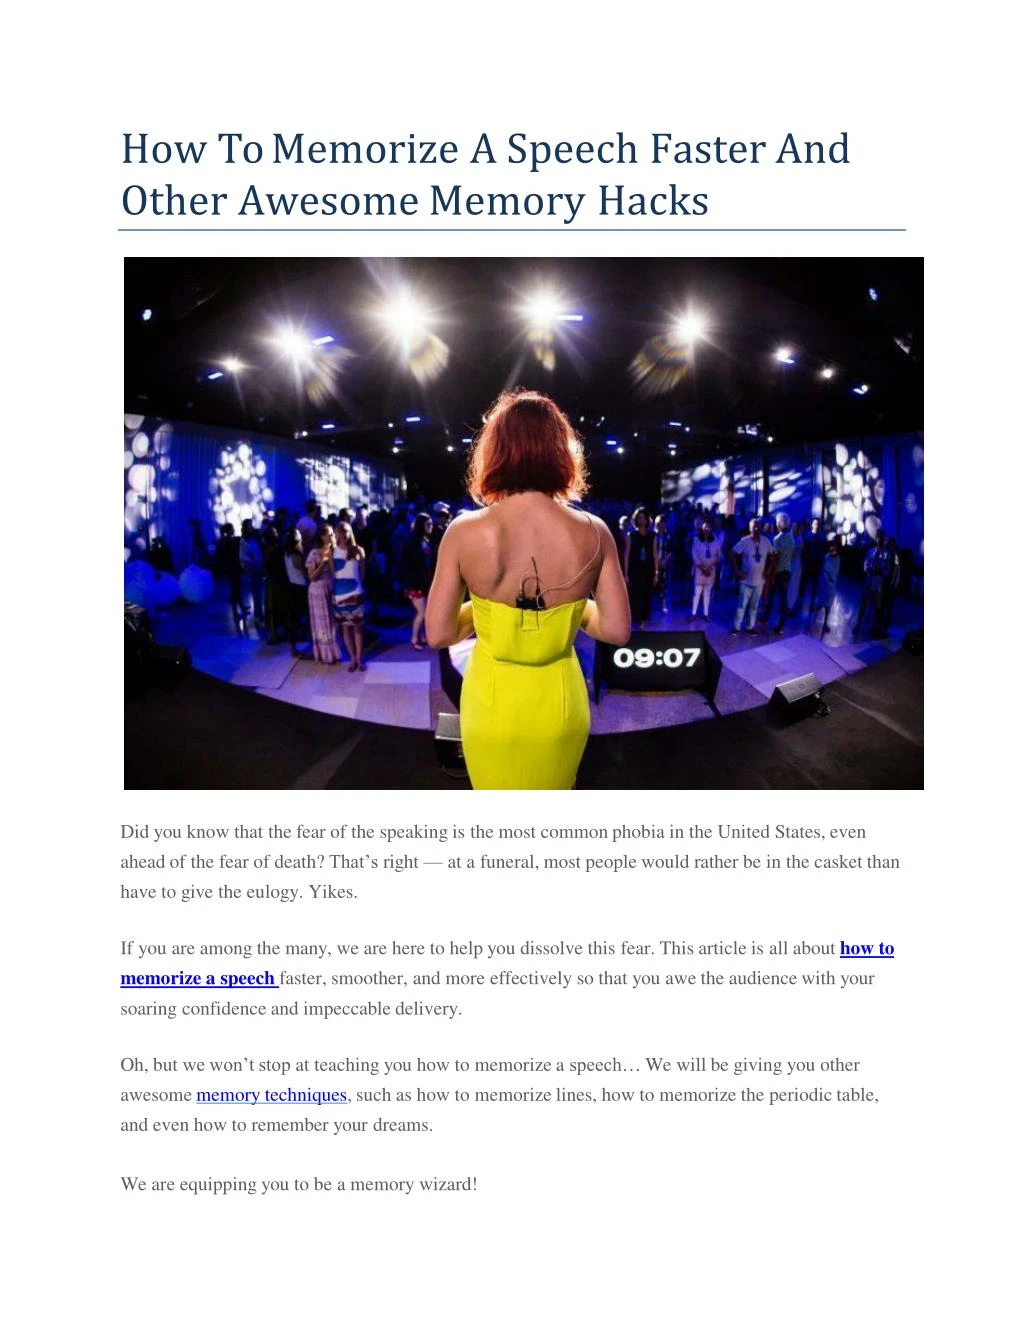 how to memorize a speech faster and other awesome memory hacks